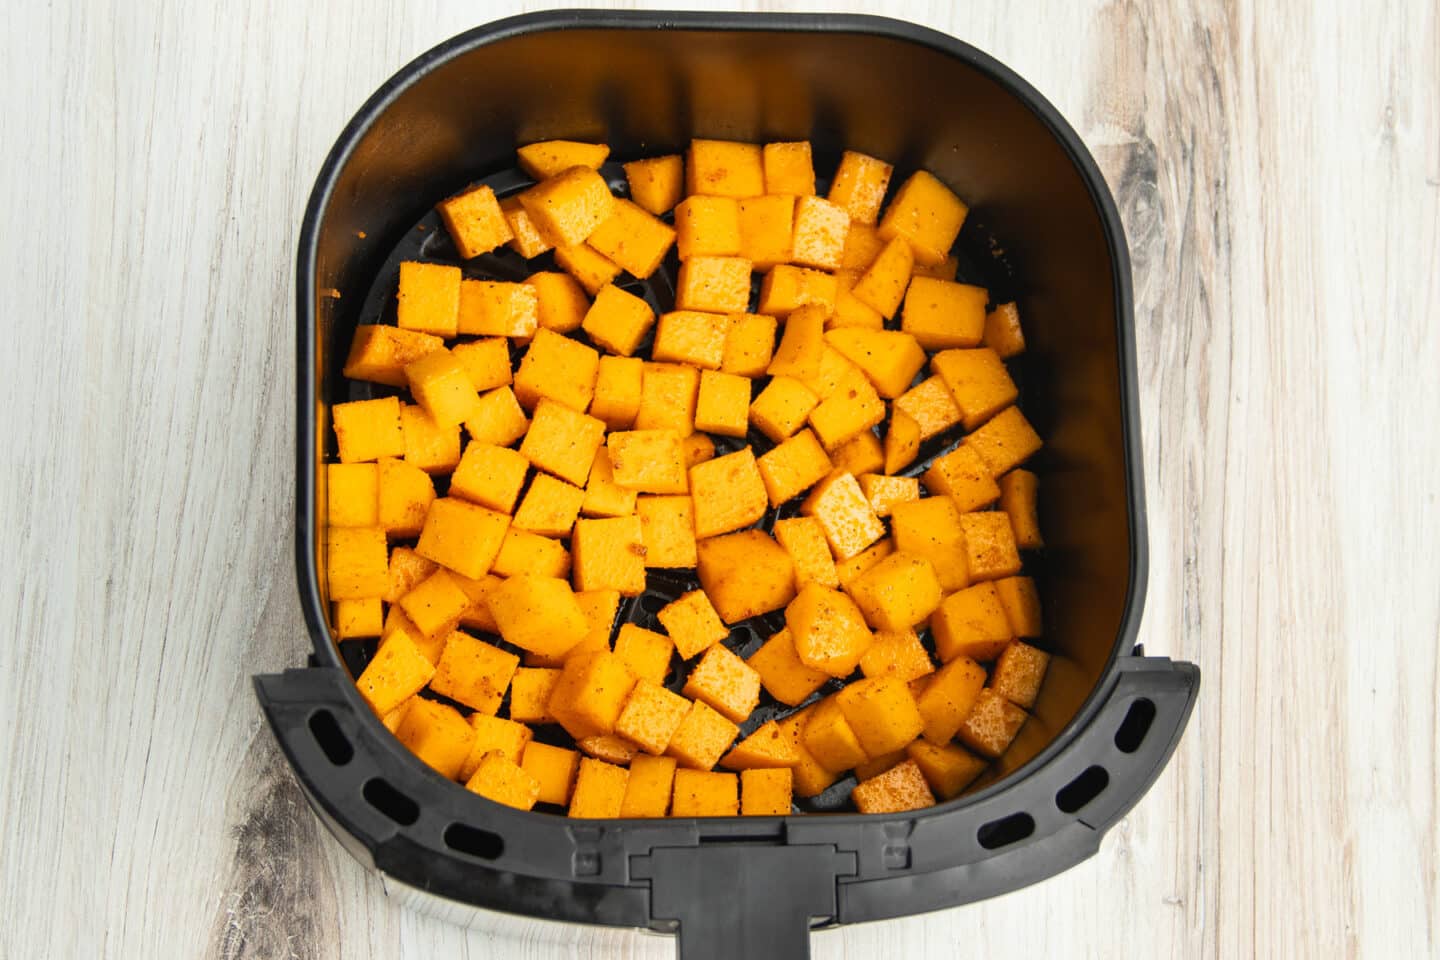 This is a picture raw butternut squash in the air fryer before cooking.